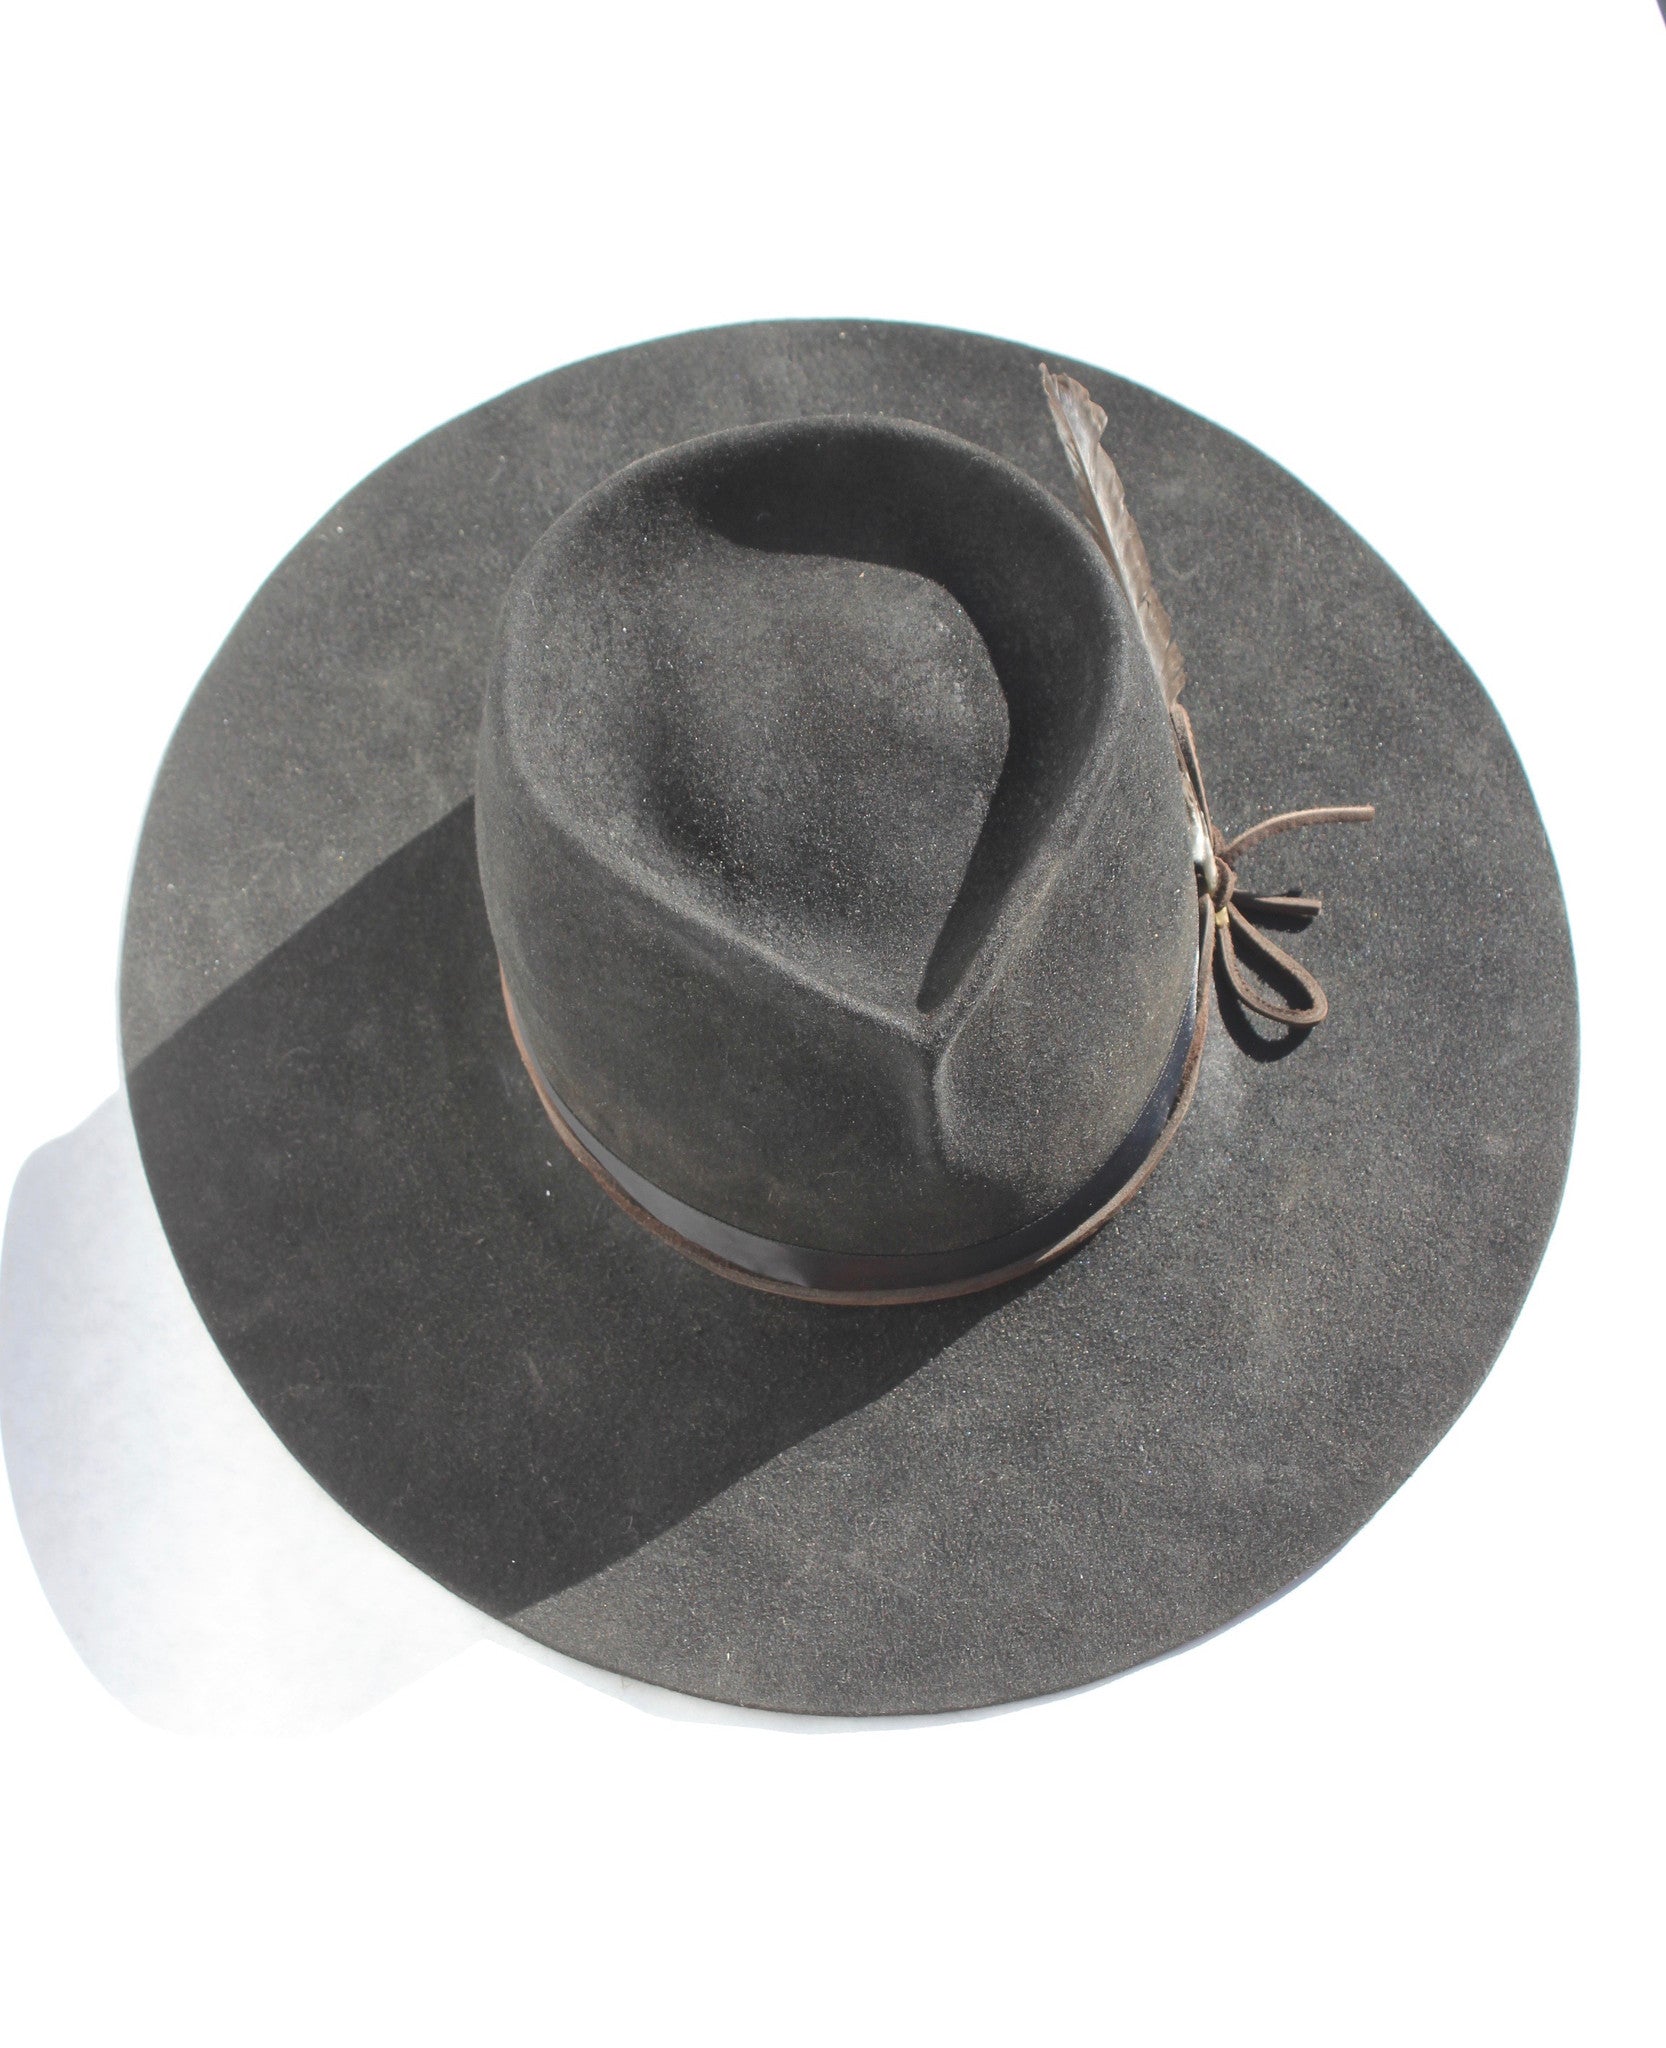 "The Rambler" Classic Pinched Crown with Flat Brim